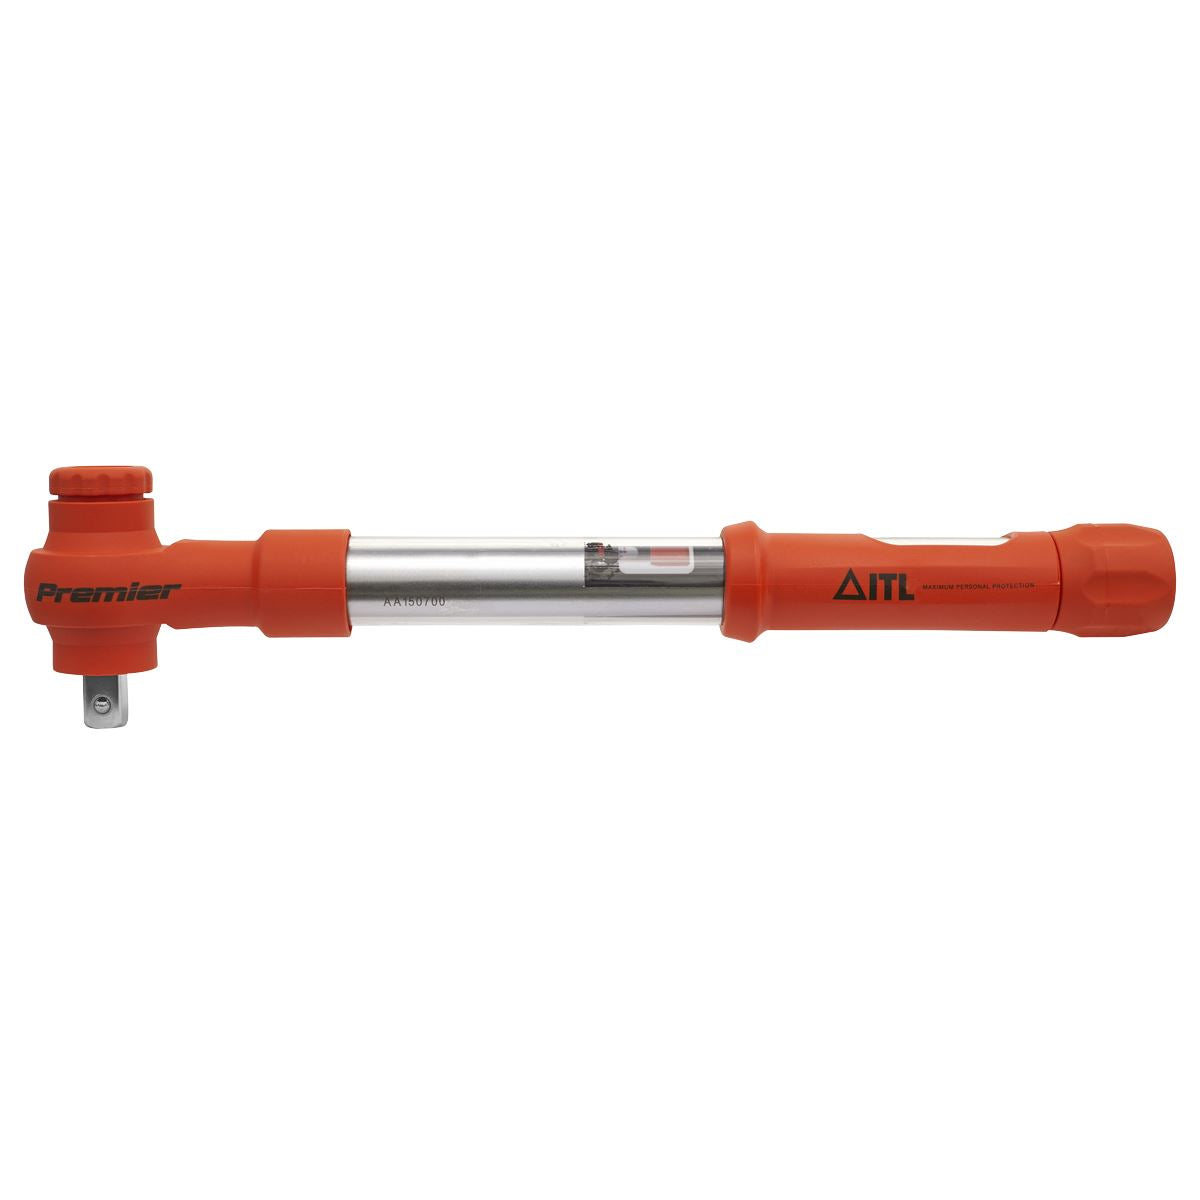 Sealey Torque Wrench Insulated 1/2"Sq Drive 20-100Nm STW807